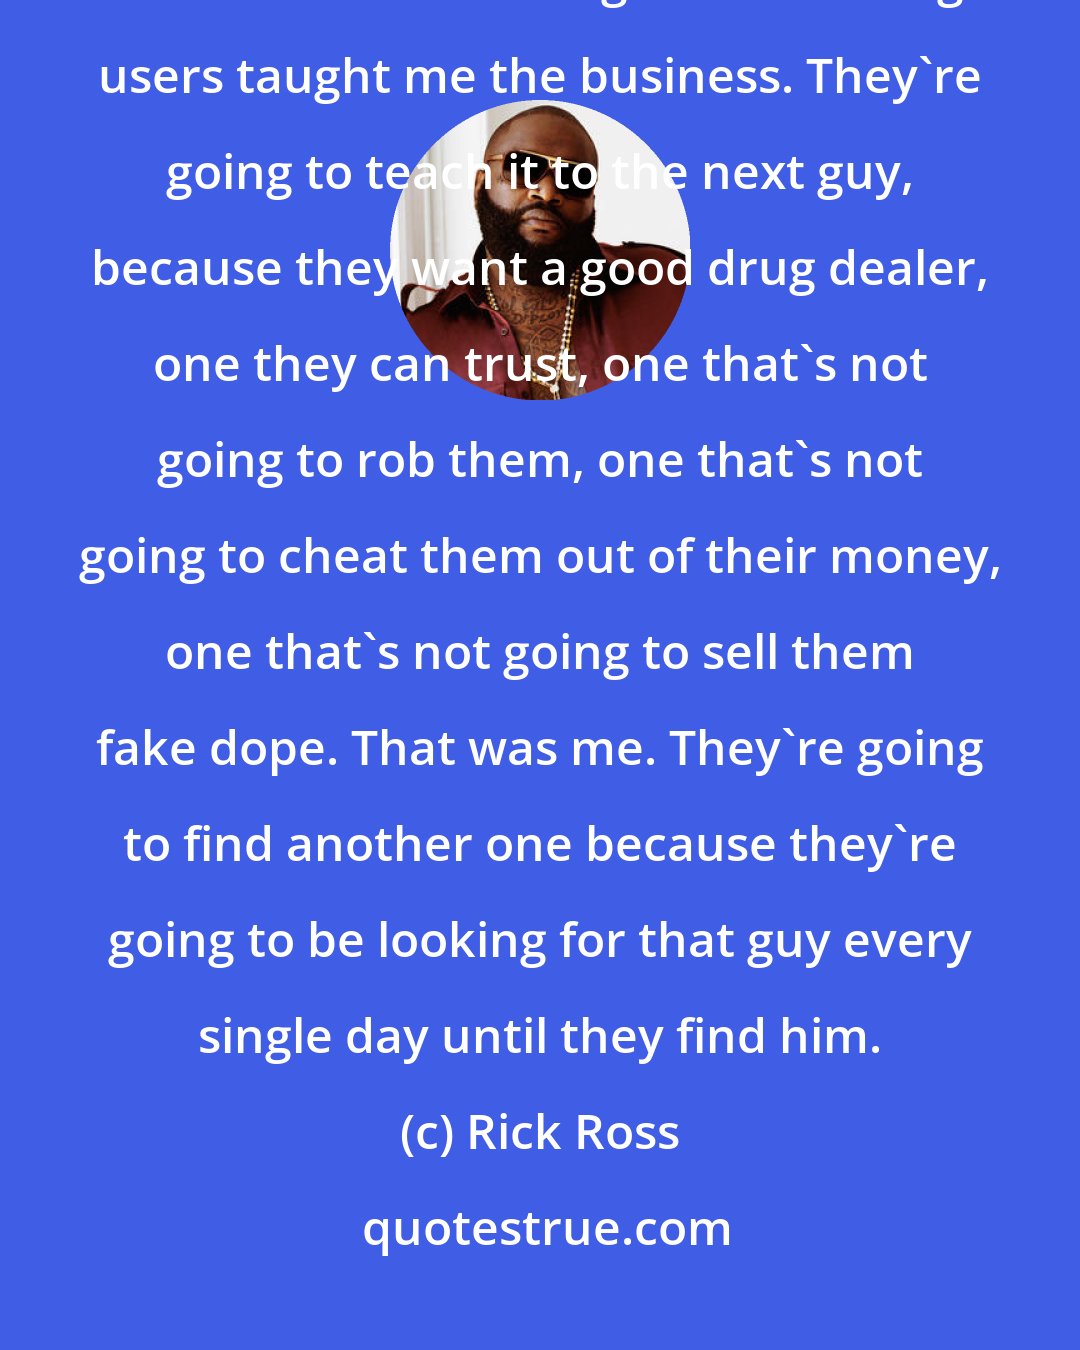 Rick Ross: Drug users made me. They taught me. I didn't know how to work a scale; I didn't know what a gram was. Drug users taught me the business. They're going to teach it to the next guy, because they want a good drug dealer, one they can trust, one that's not going to rob them, one that's not going to cheat them out of their money, one that's not going to sell them fake dope. That was me. They're going to find another one because they're going to be looking for that guy every single day until they find him.